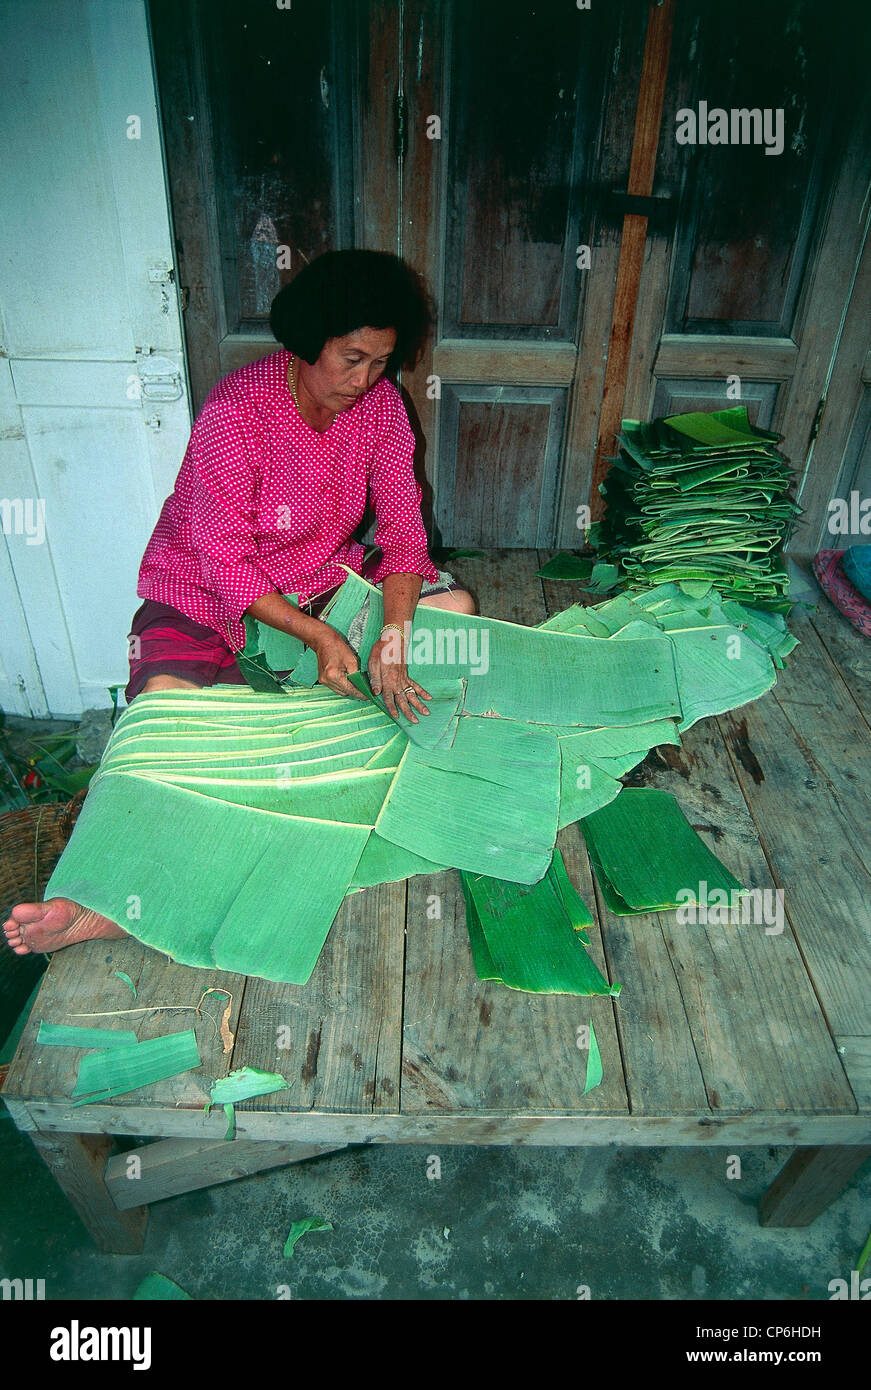 Thailand - Province of Chiang Mai - Chiang Mai. A woman cuts banana leaves, then used for cooking Stock Photo